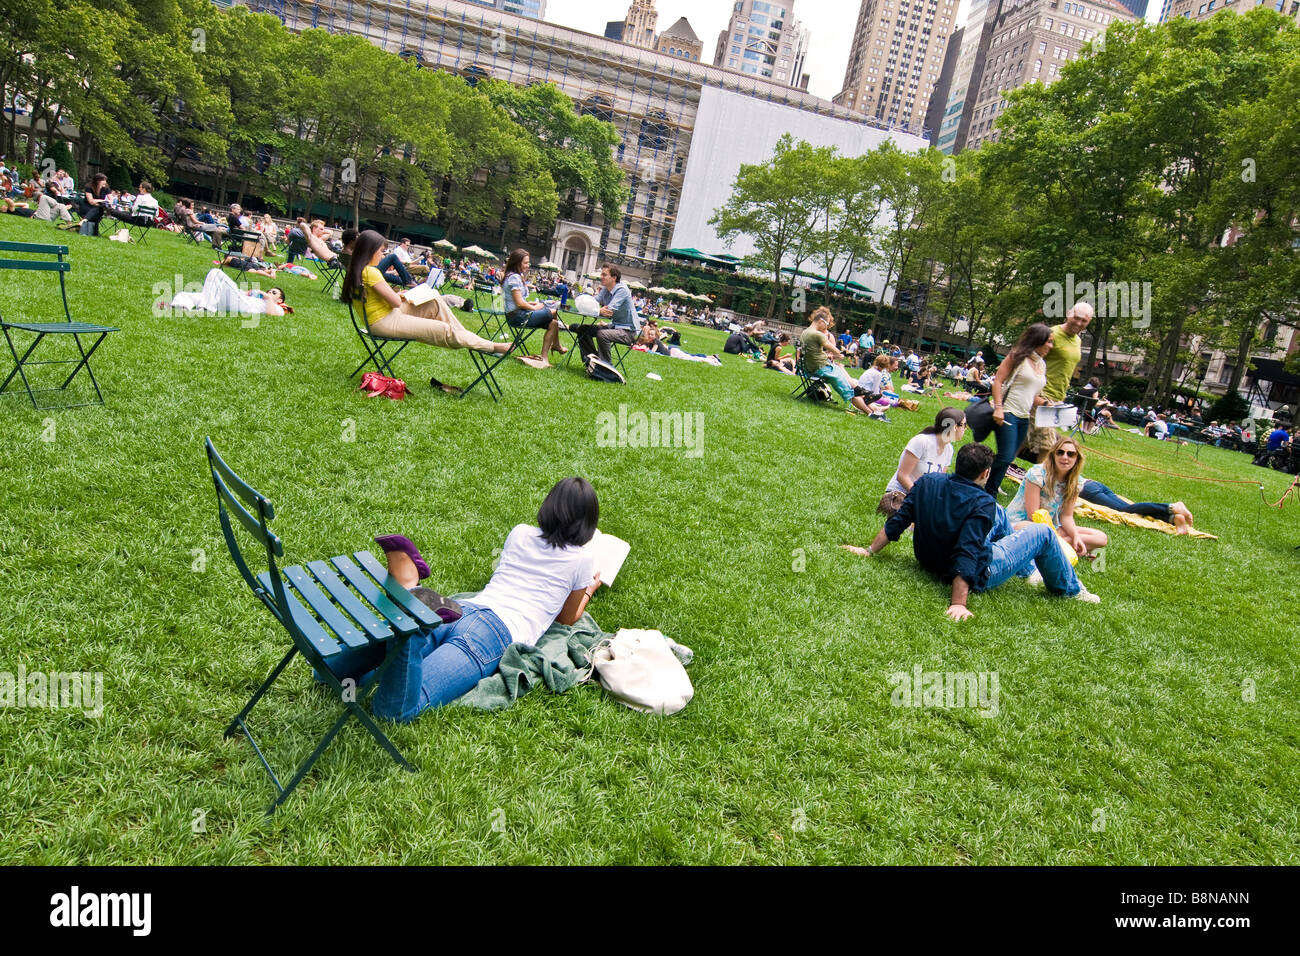 People sitting on chairs and relaxing on the lawn in a public garden Stock Photo